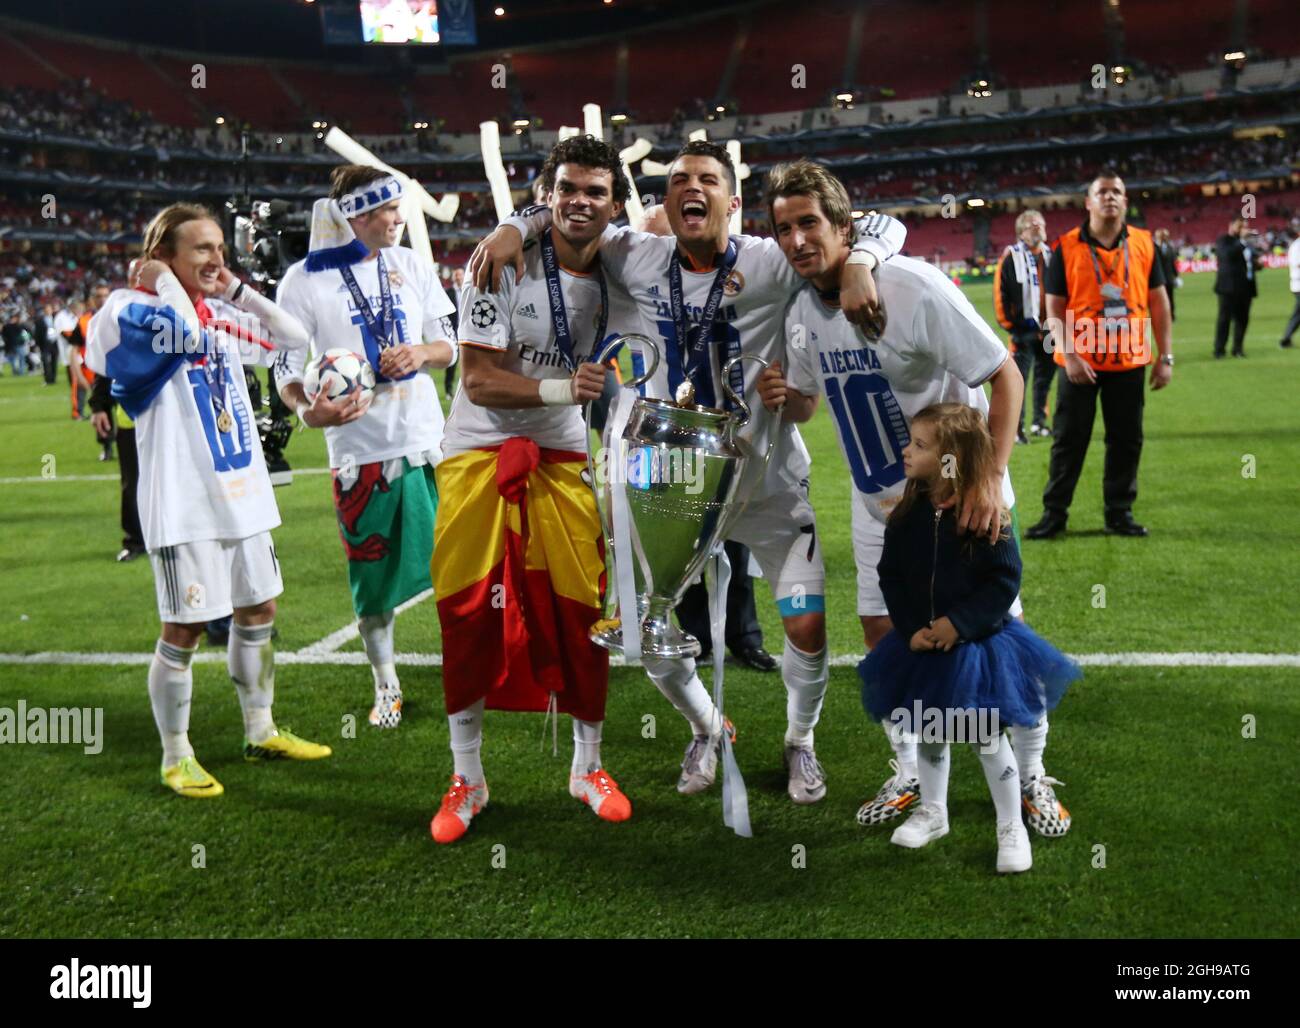 Real Madrid's Pepe, Cristiano Ronaldo and Daniel Carvajal celebrate with the trophy during the UEFA Champions League soccer final match between Real Madrid and Atletico Madrid at Estadio da Luz Stadium in Lisbon, Portugal on May 24, 2014. Pictured by David Klein/Sportimage. Stock Photo